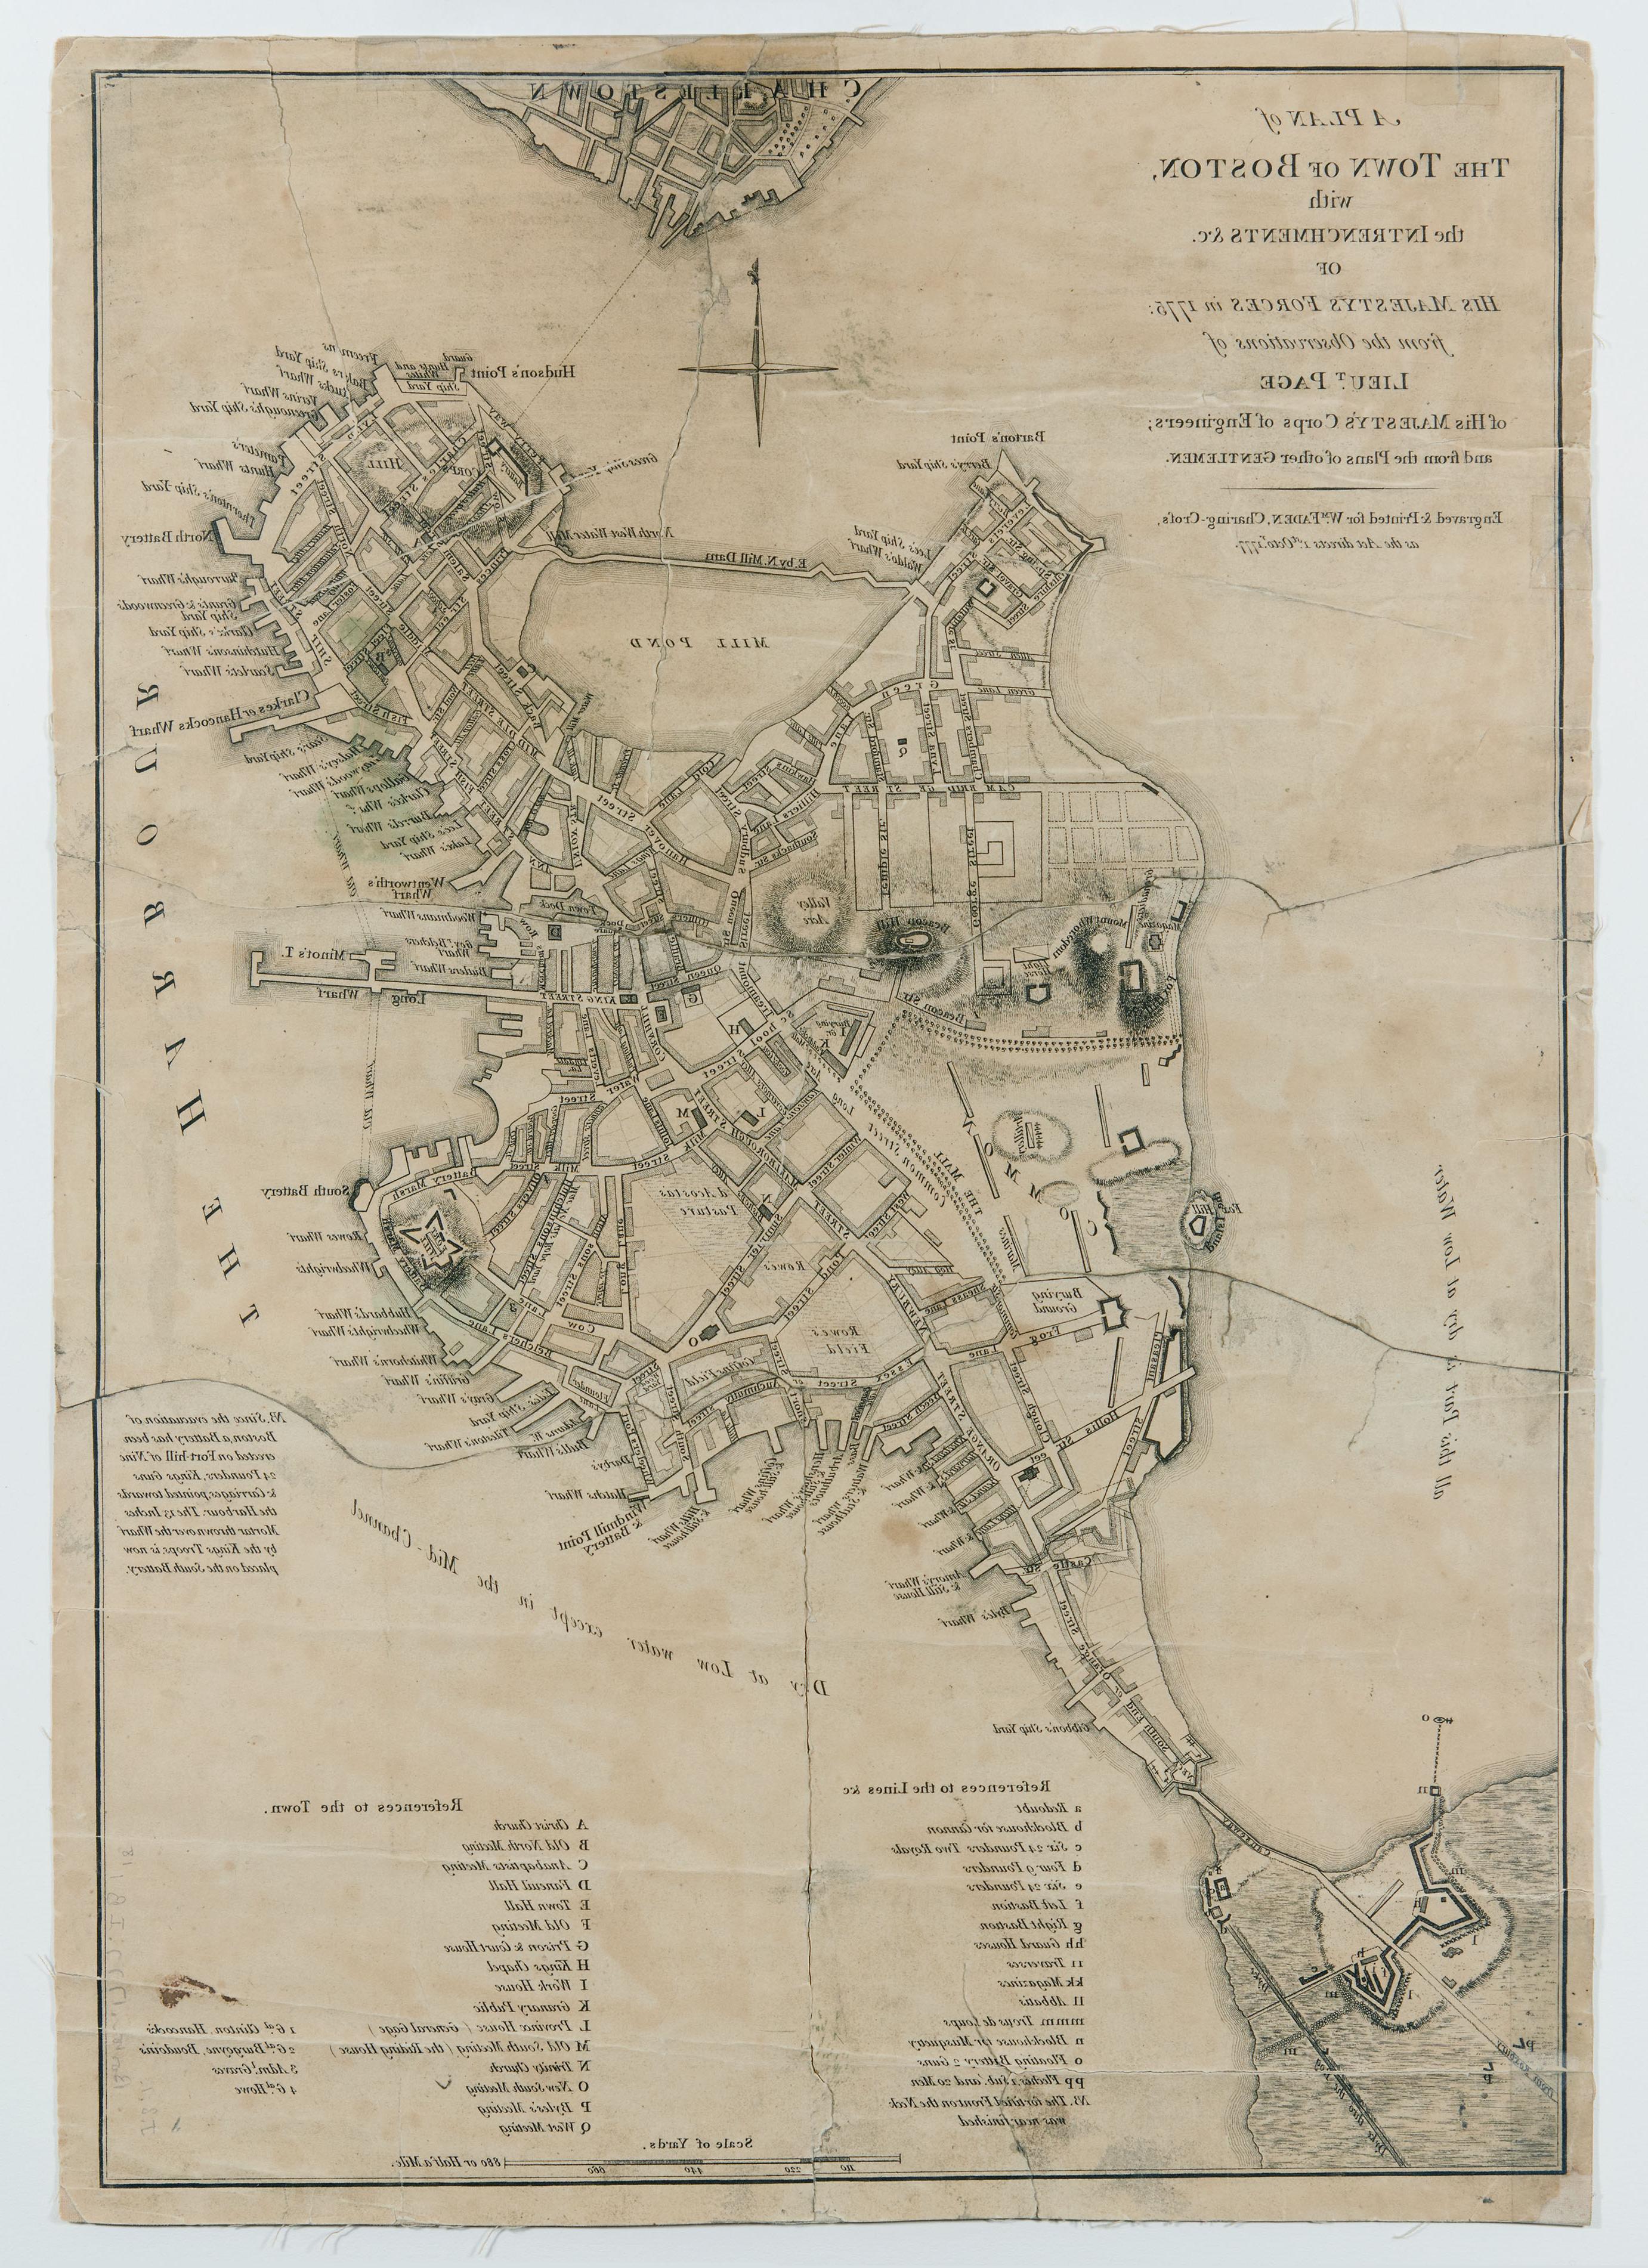 map of boston harbor depicted in black ink with streets 和 wharves labeled; around the harbor text reads "dry at low water"